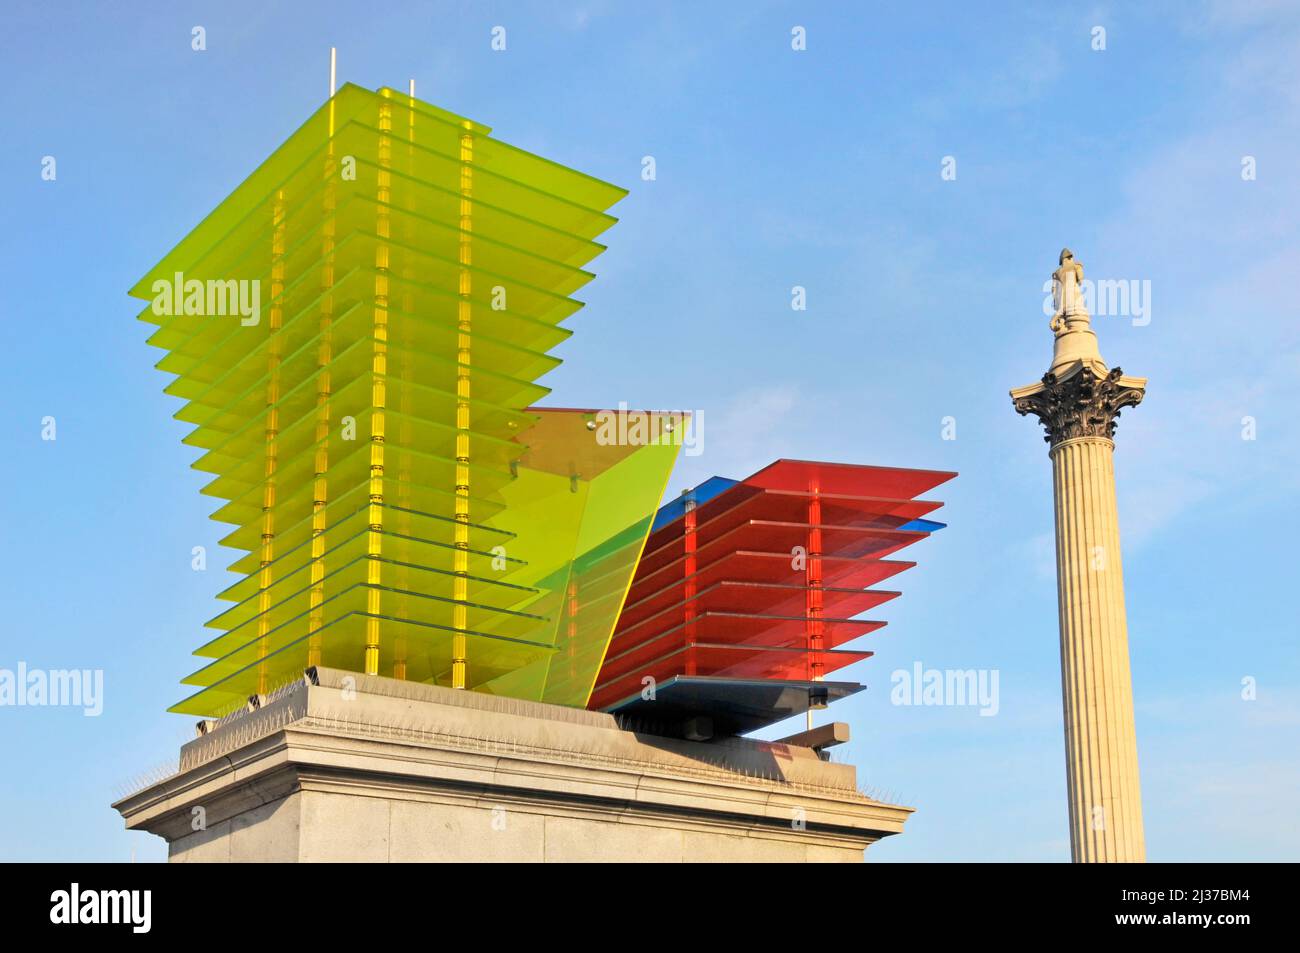 Fourth Plinth Trafalgar Square  London multi coloured glass ‘Model for a Hotel’ by Thomas Schütte a contemporary artist overlooked by Nelsons Column Stock Photo